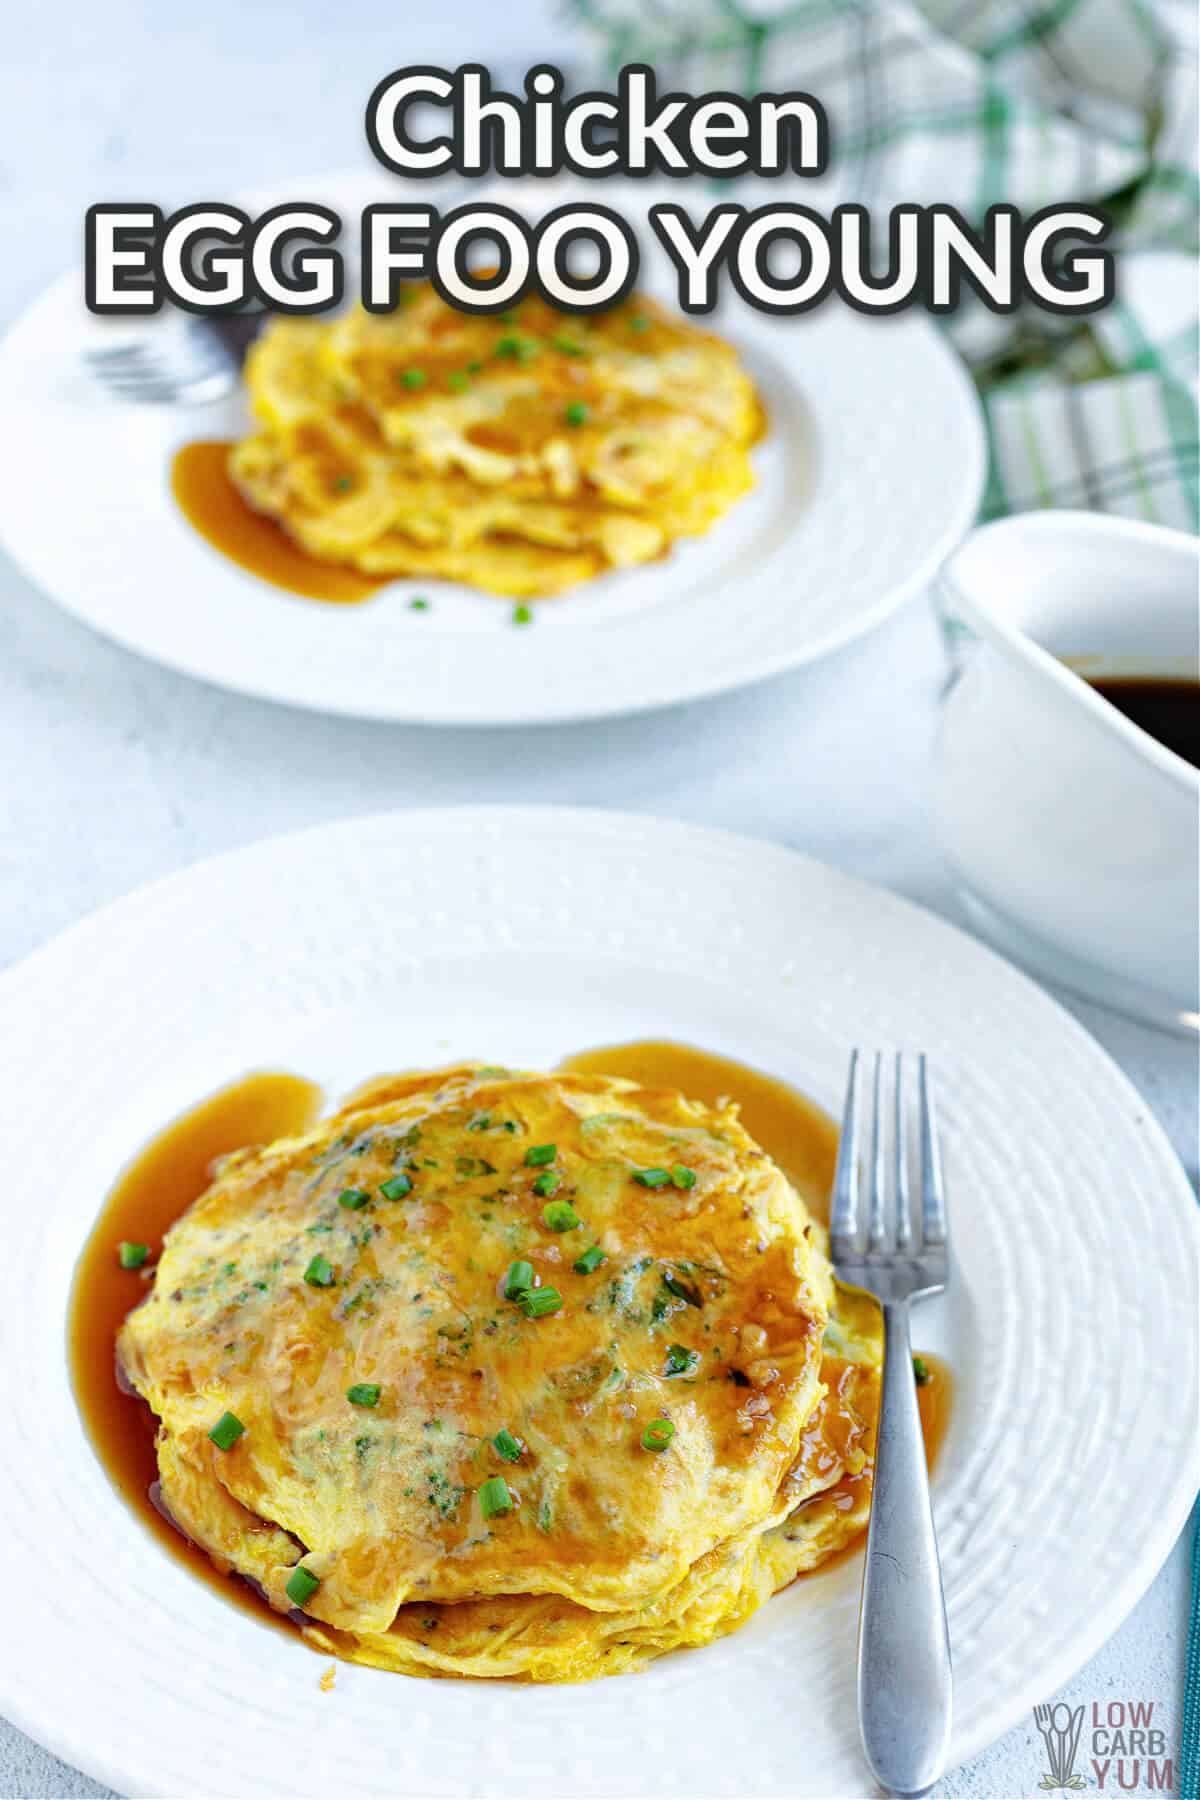 chicken egg foo young recipe with text overlay